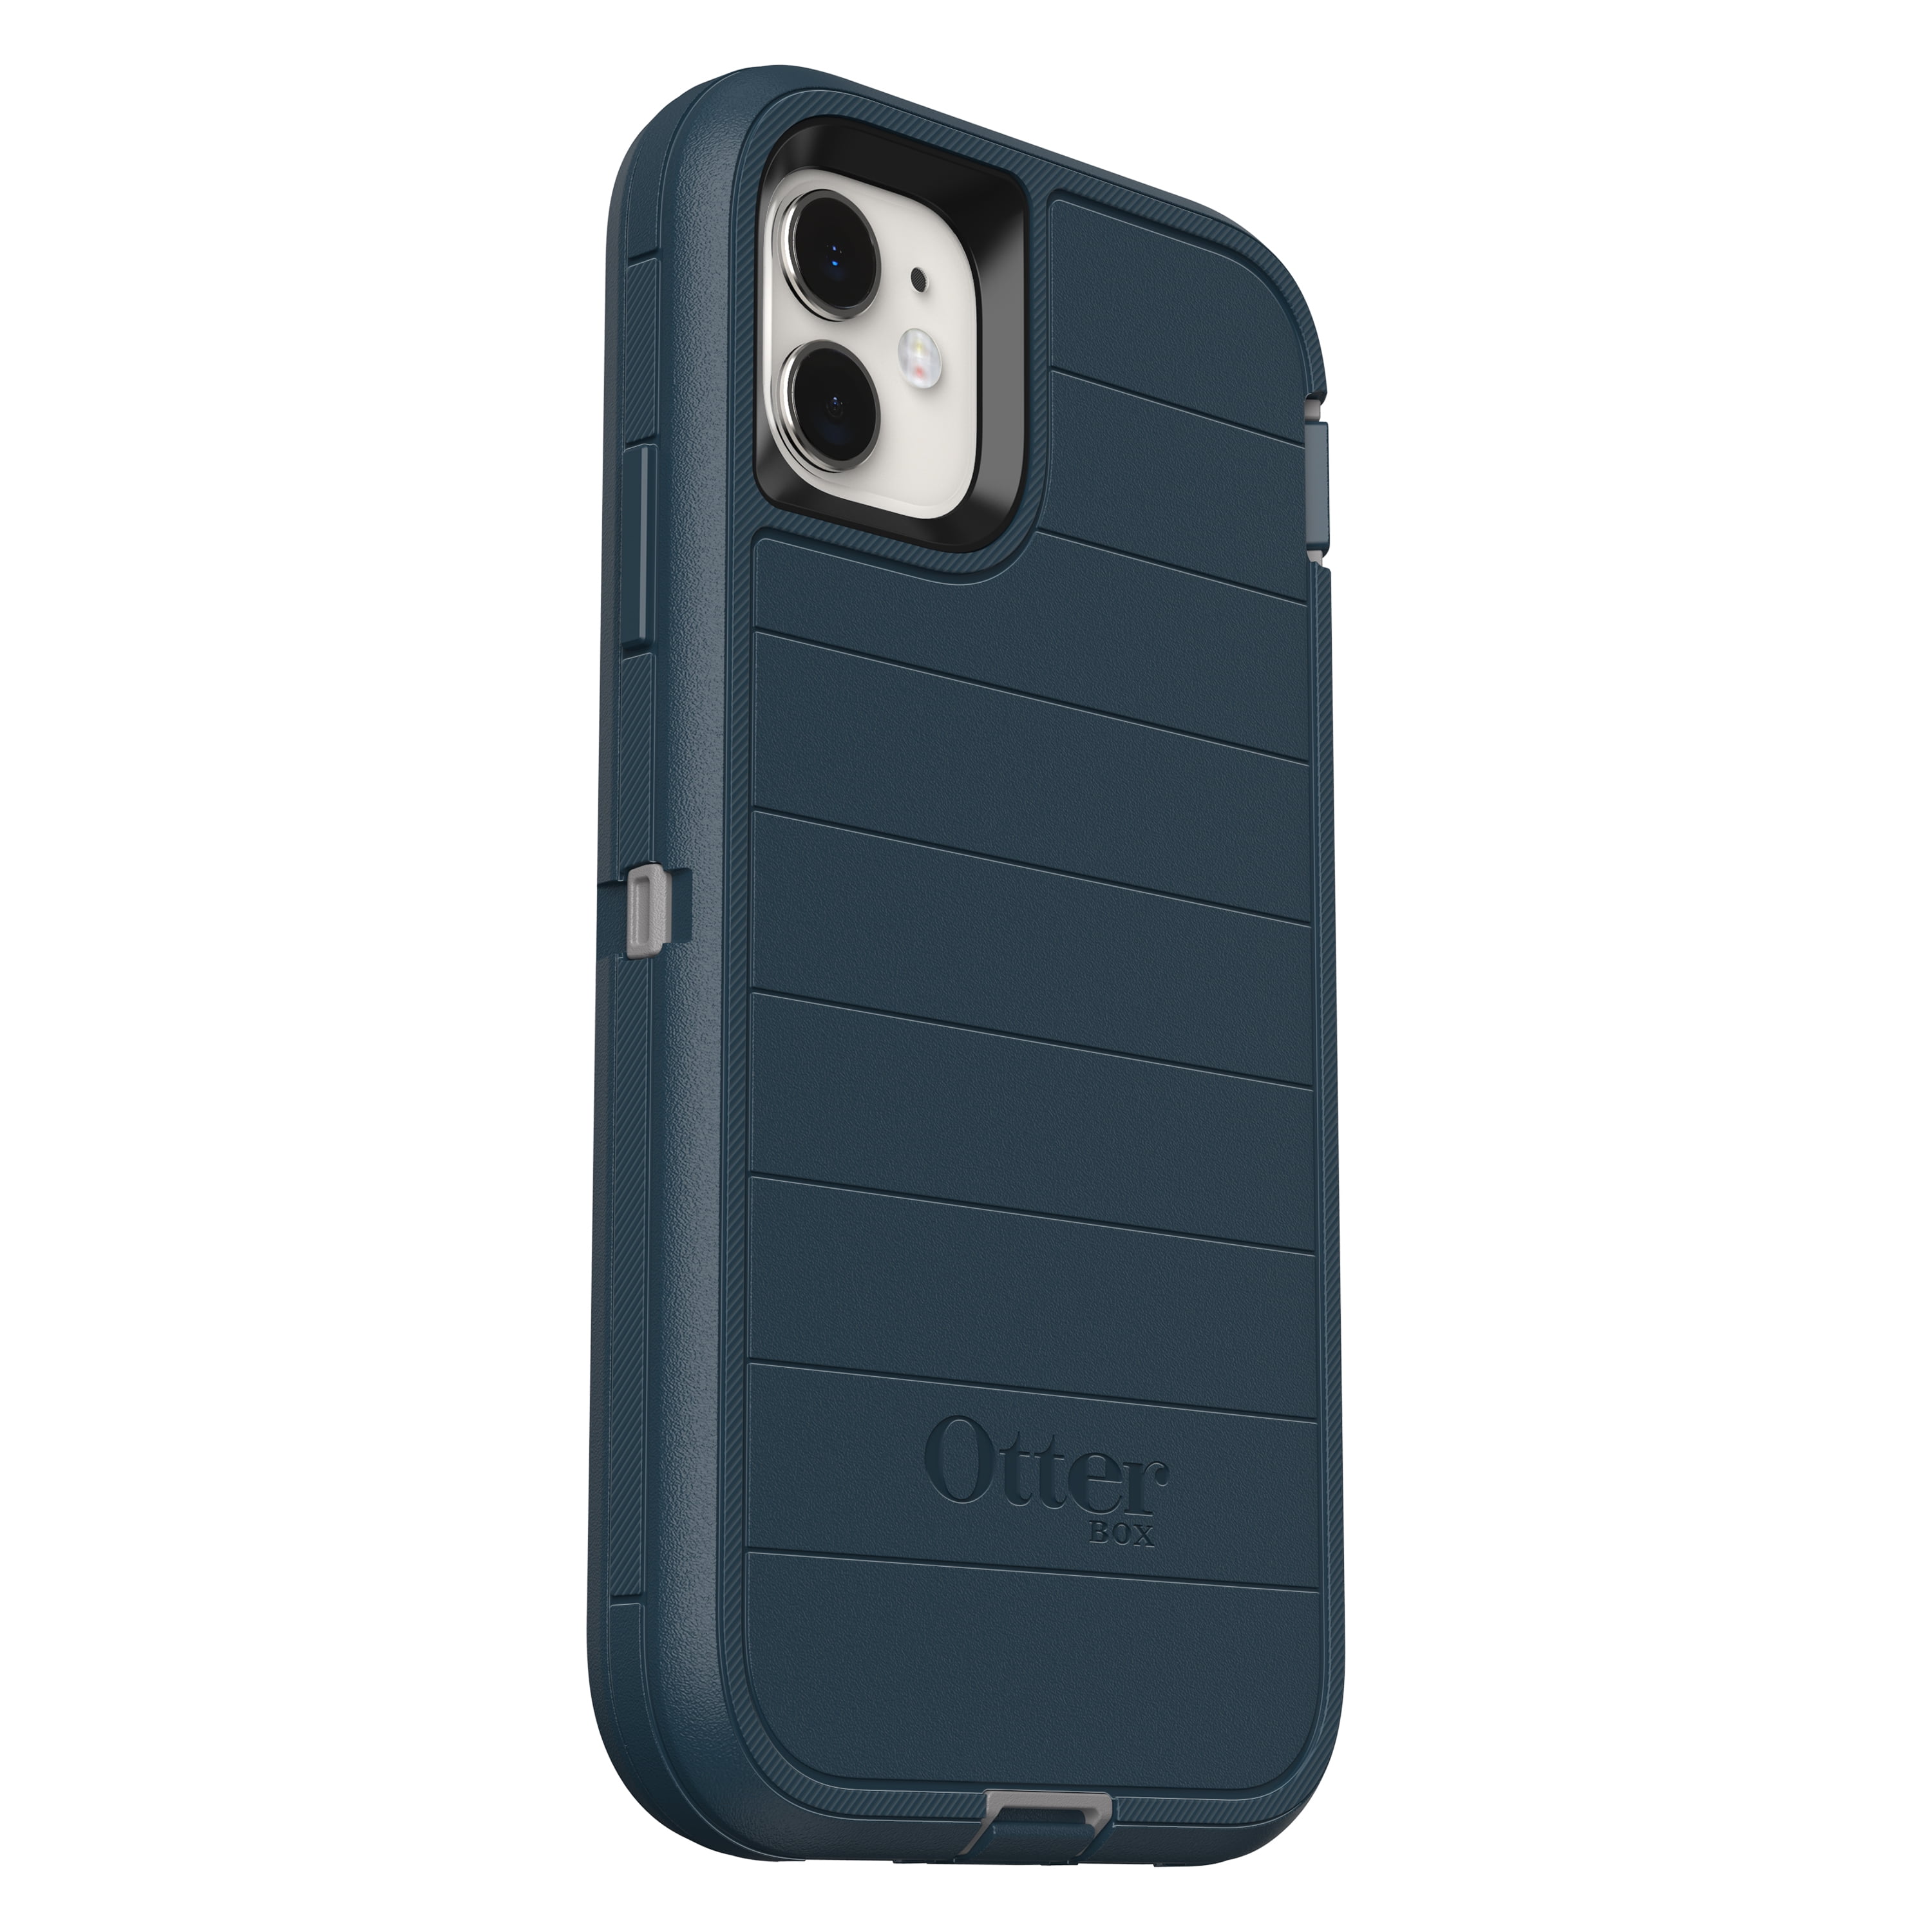 Bulk Single-pack - BLACK 1 unit OTTERBOX DEFENDER SERIES SCREENLESS EDITION Case for iPhone 11